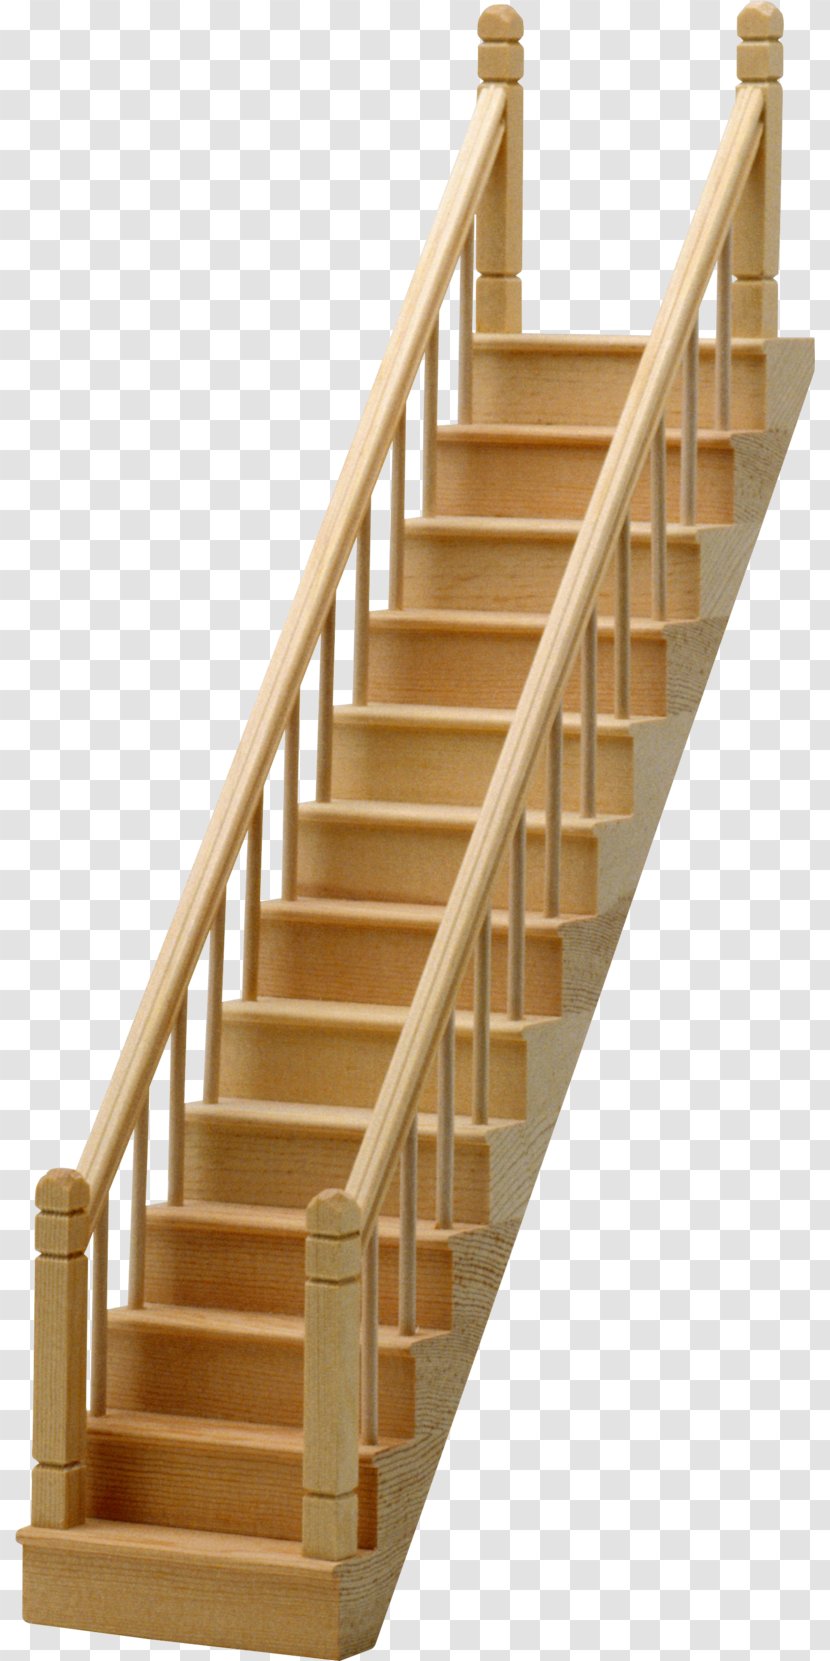 Staircases Handrail Baluster Architecture - Ladder Transparent PNG